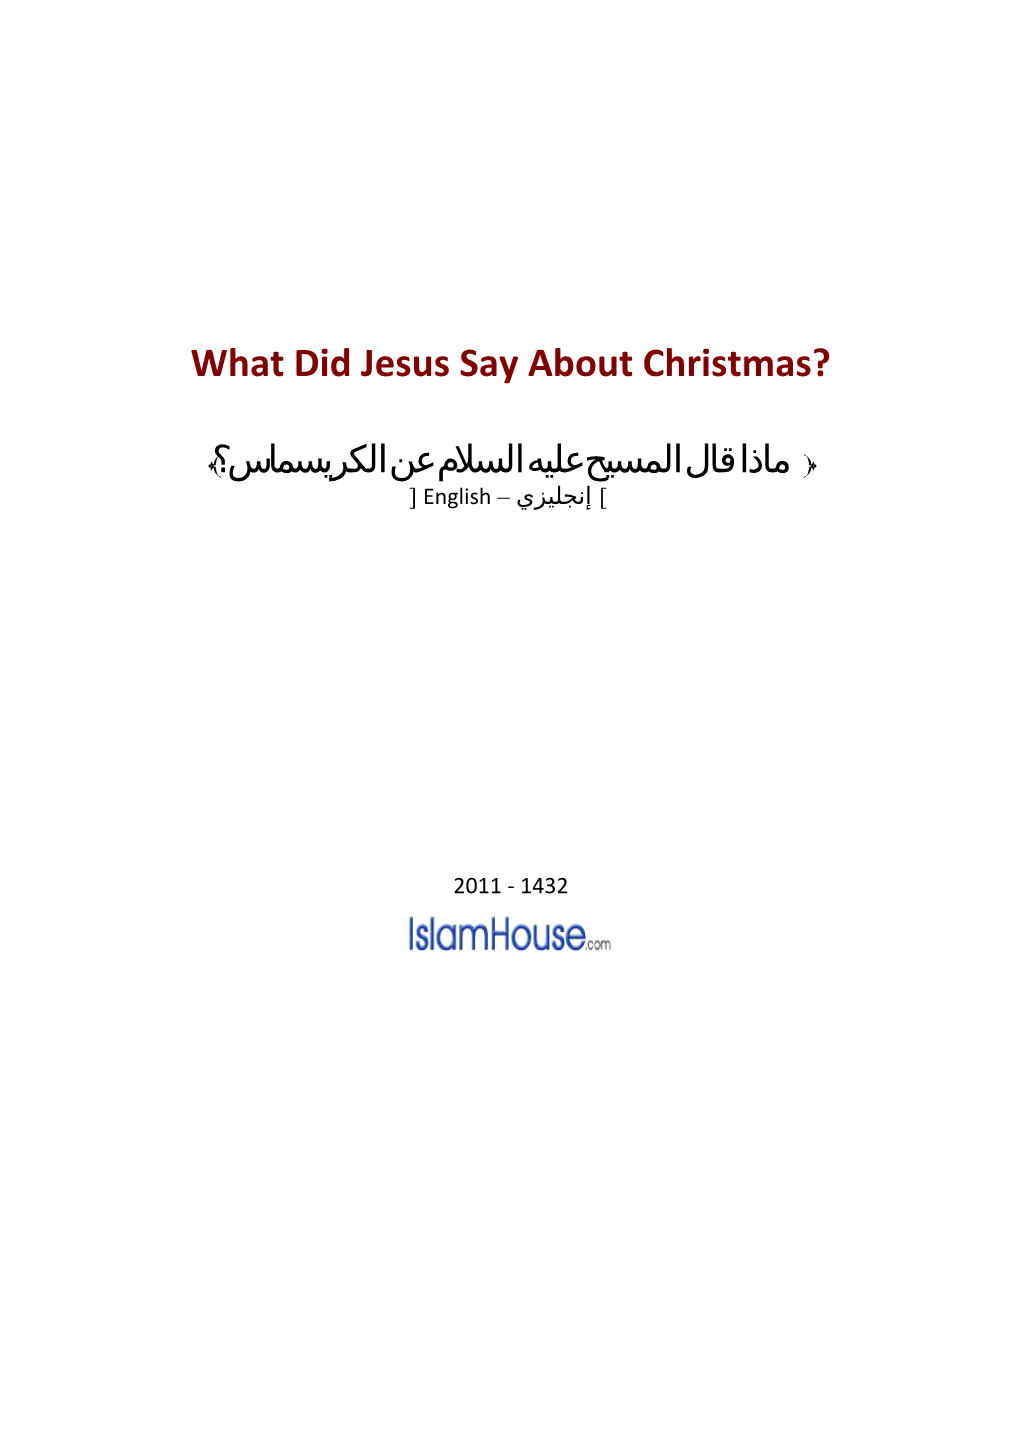 What Did Jesus Say About Christmas?